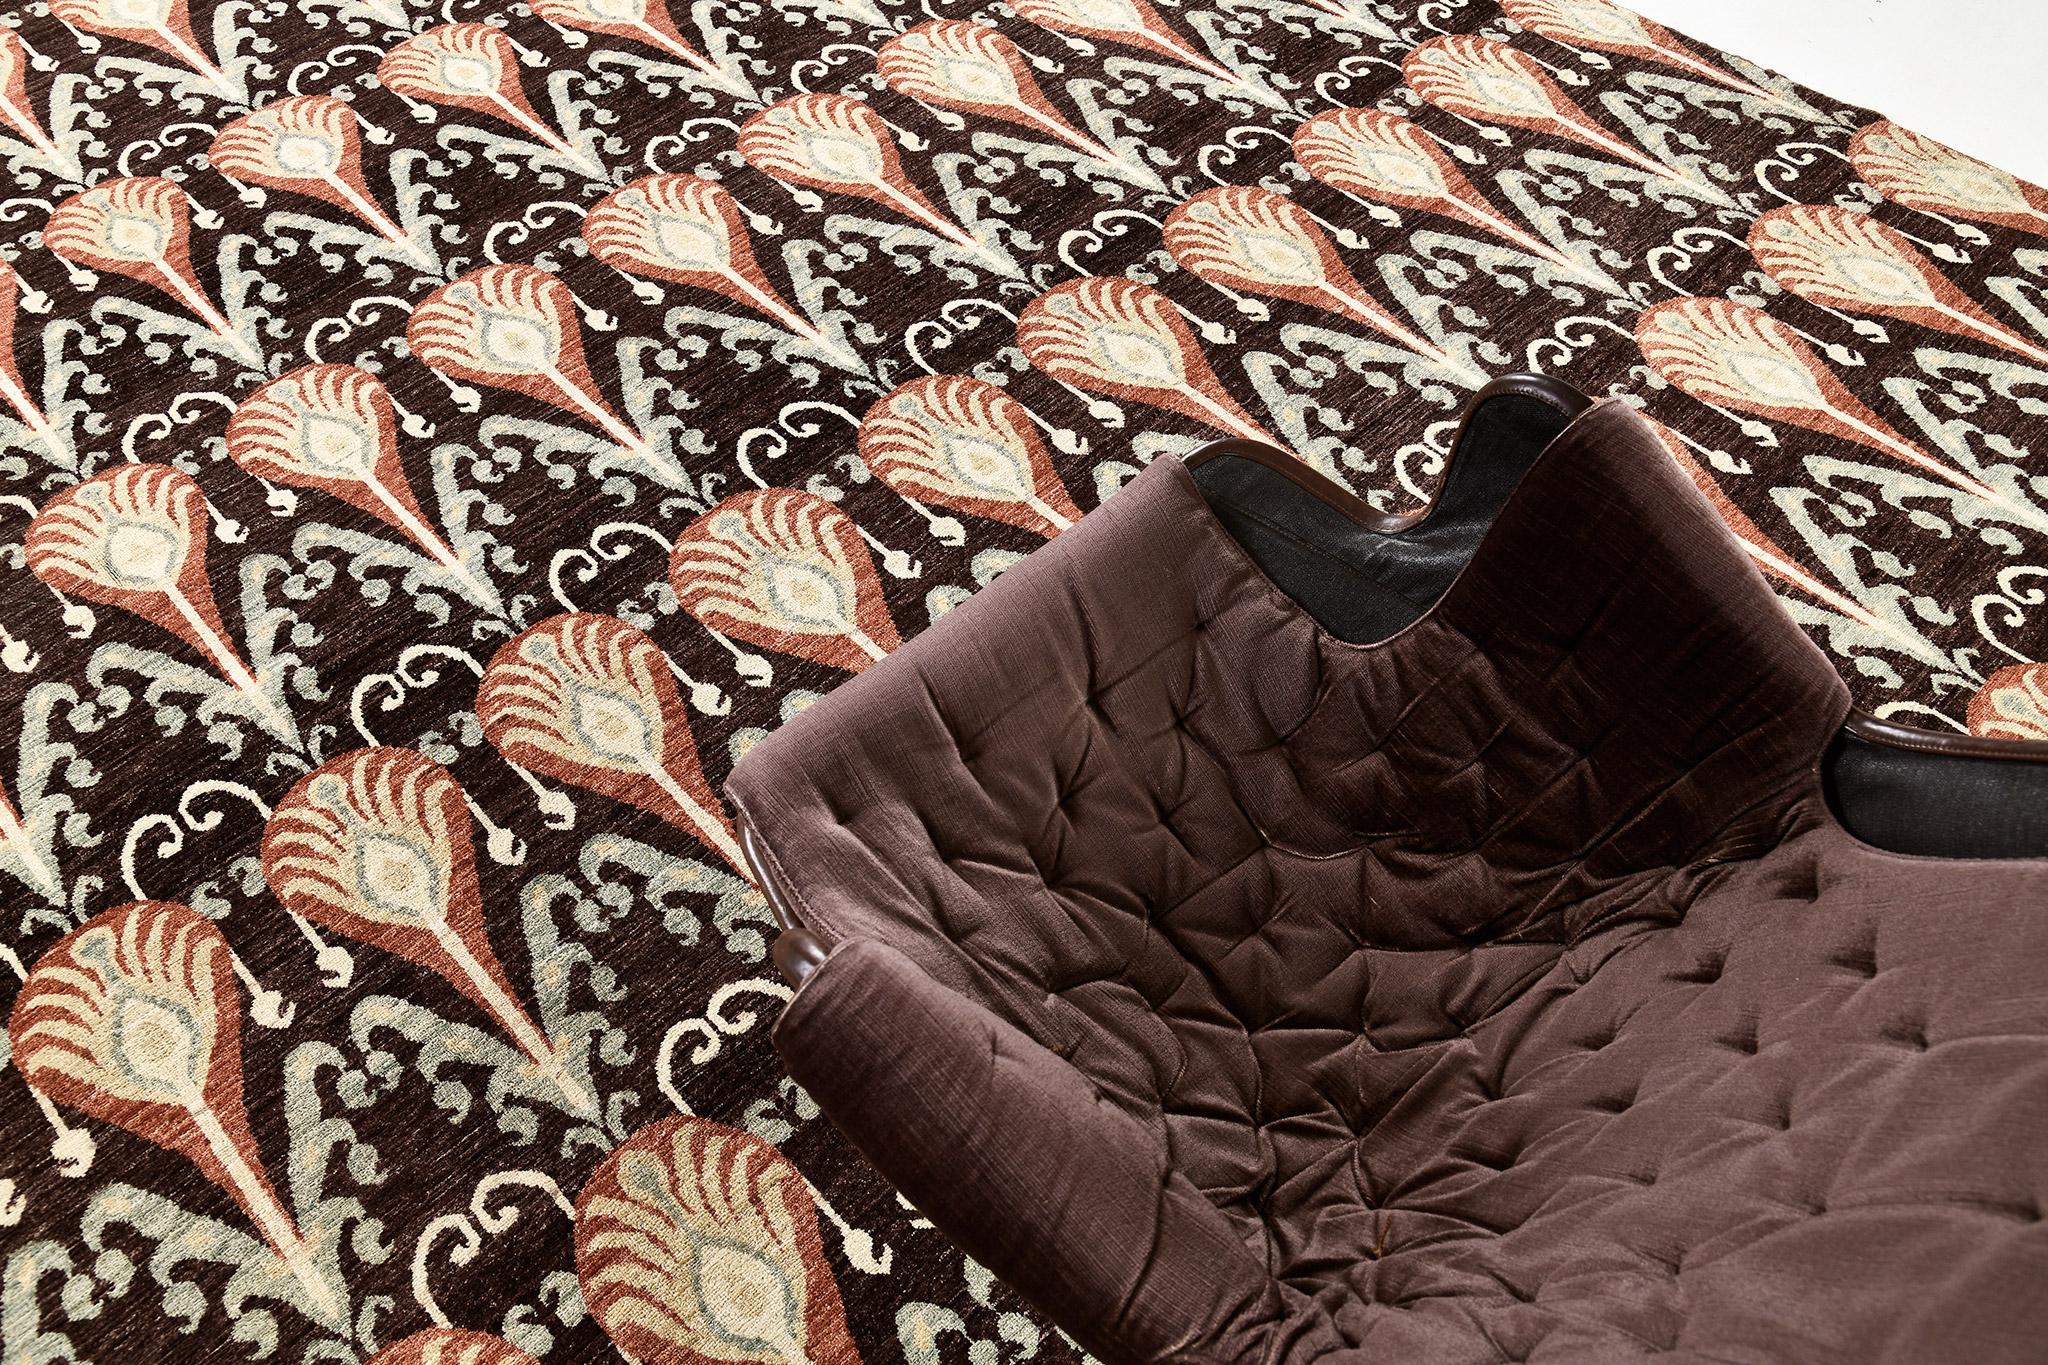 A modern vibrant transitional rug that has a well-balanced symmetry and vitality. This magnificent rug beautifully embodies sultry vibes. The hickory field is covered with a series of vivid repetitive Ikat patterns in the inviting shades of